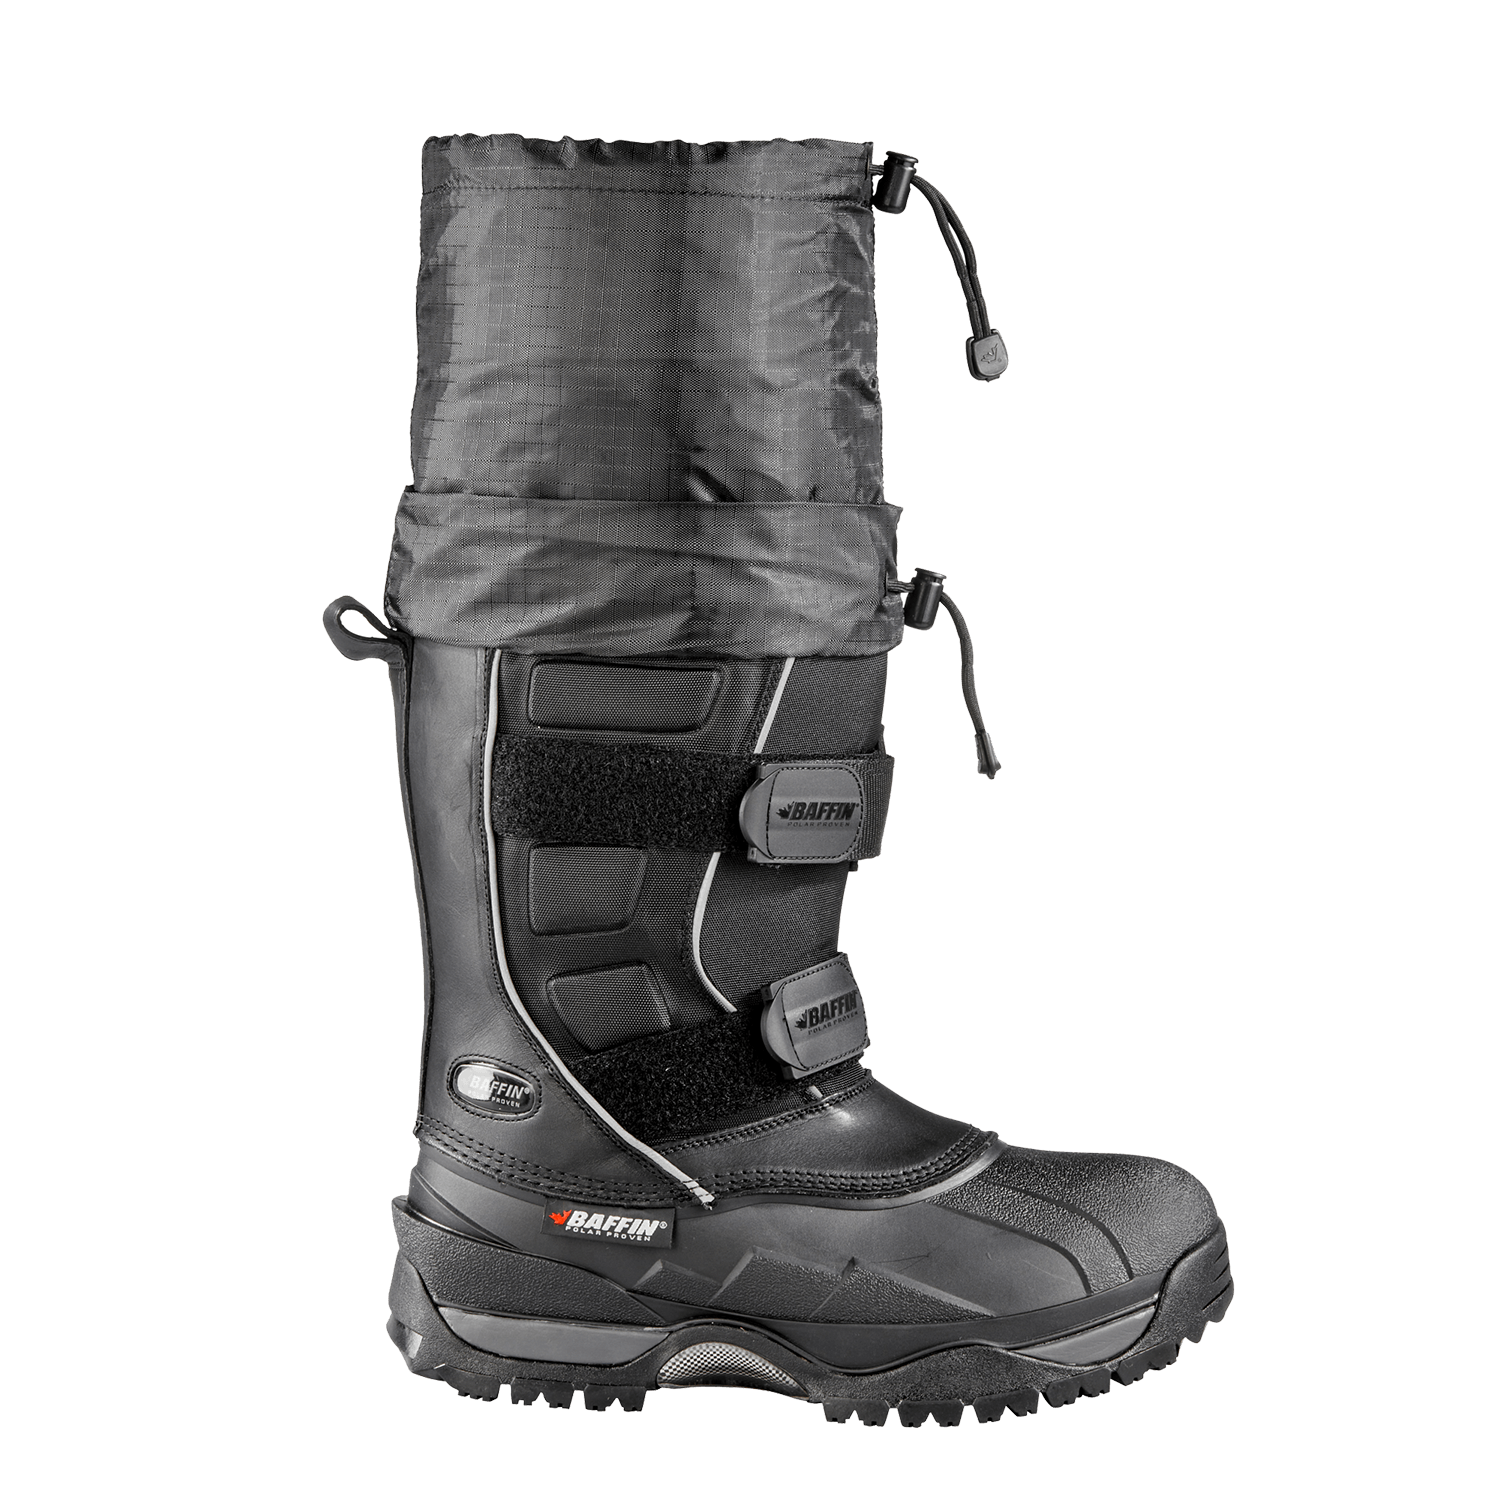 EIGER | Men's Boot – Baffin - Born in the North '79